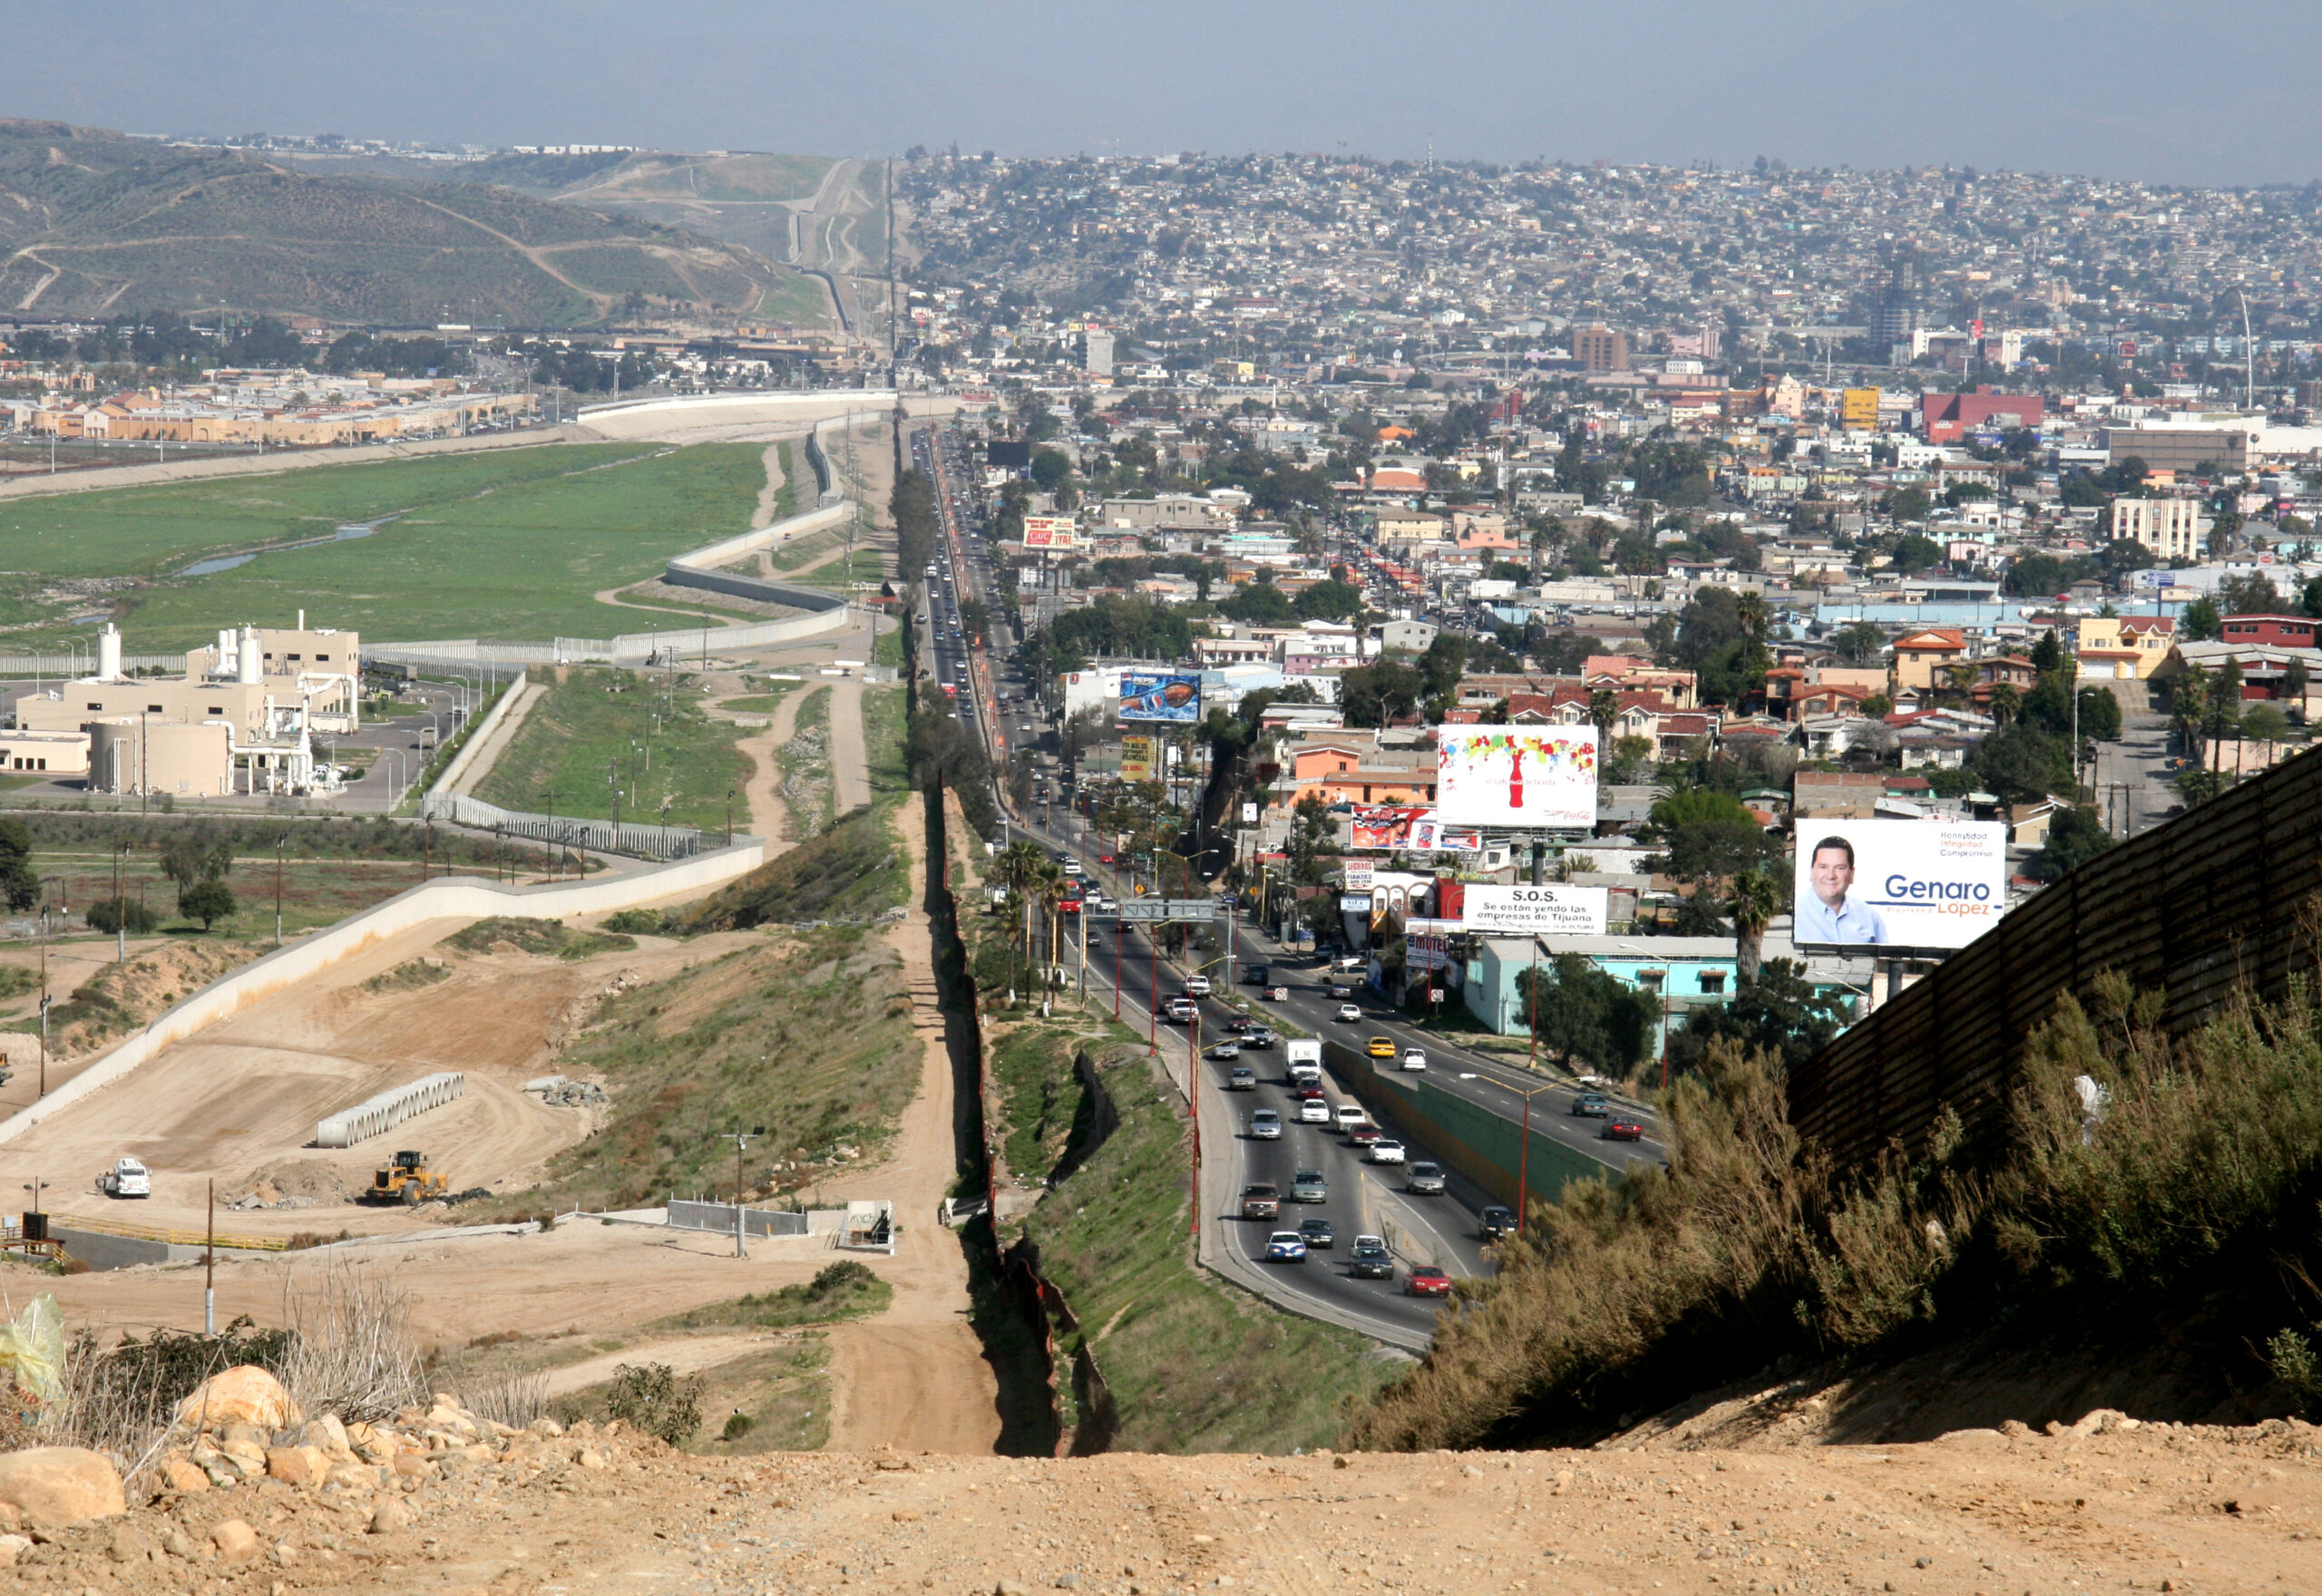 manufacturing in the Mexican border region